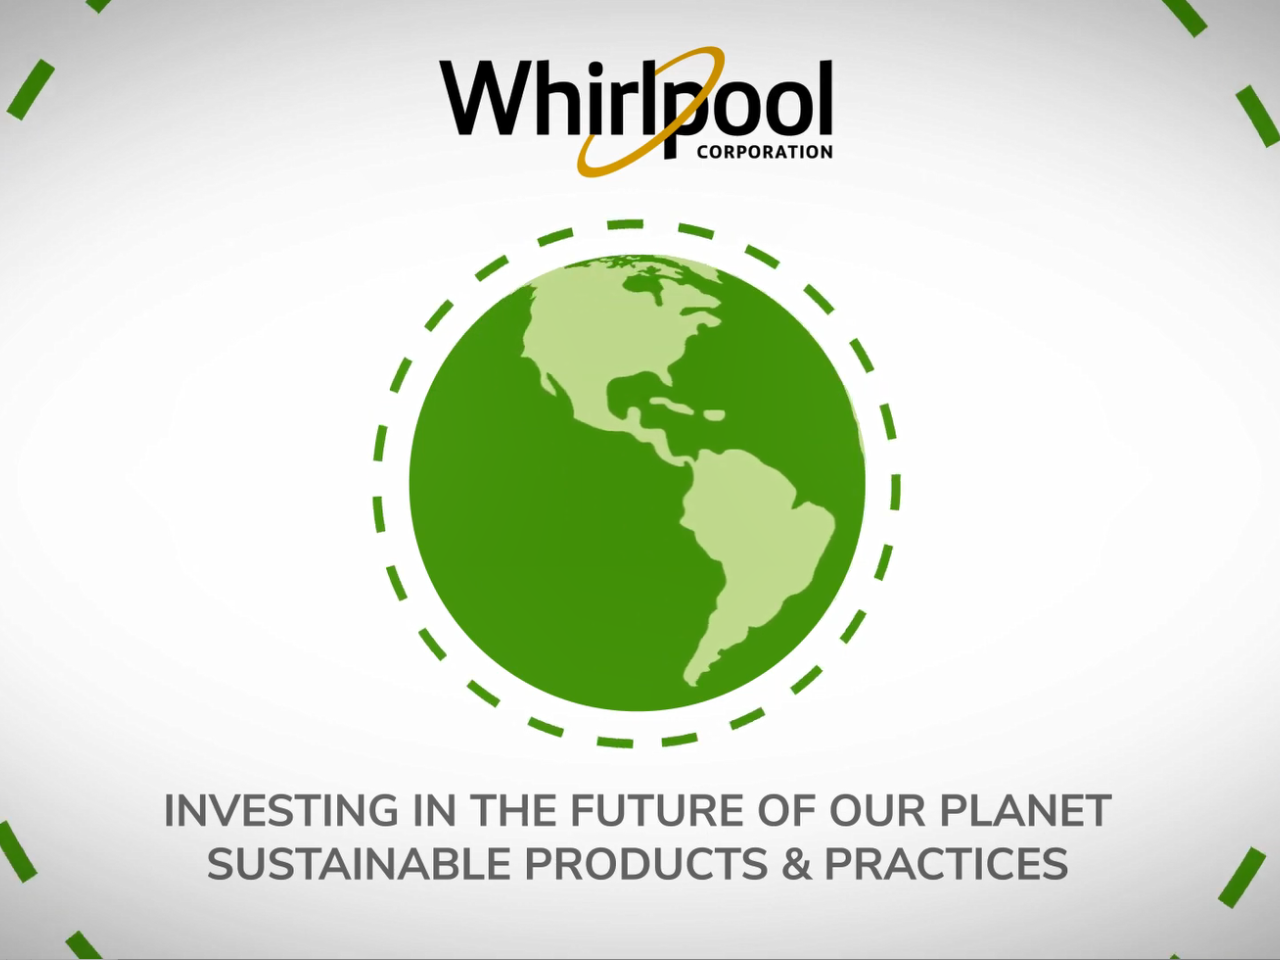 Whirlpool logo over a green globe. "Investing in the future of our planet..."